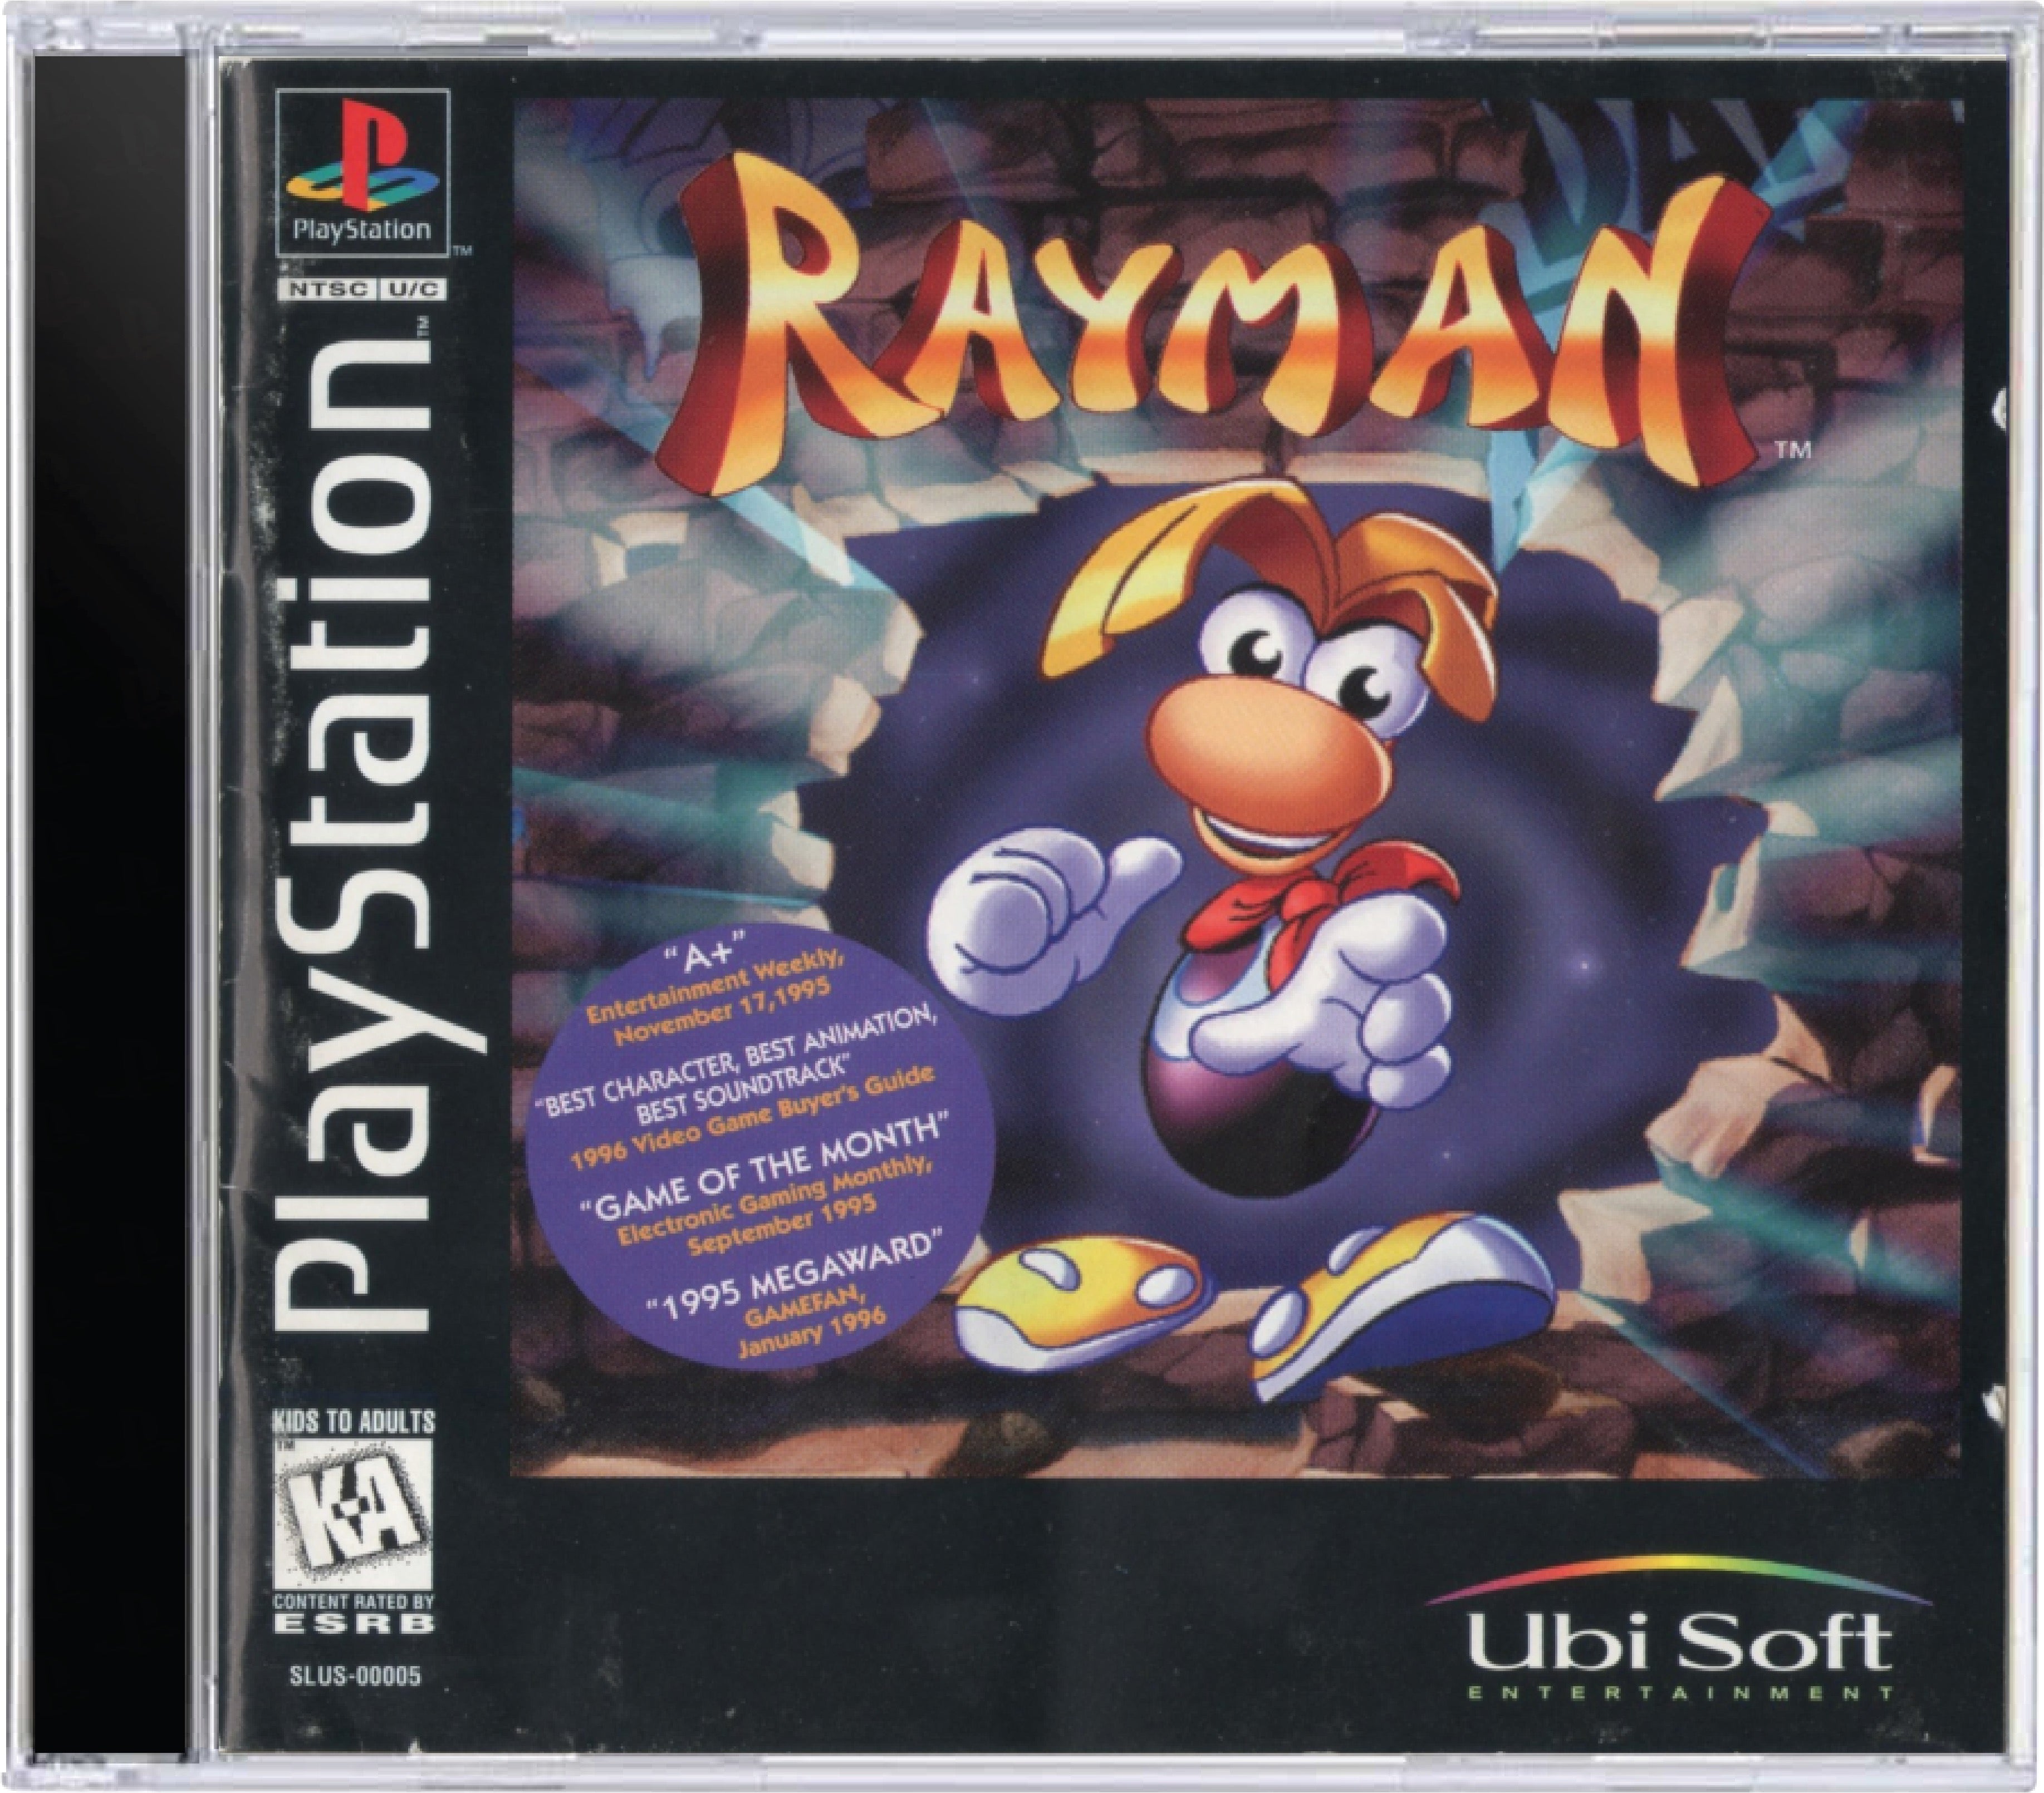 Rayman Cover Art and Product Photo